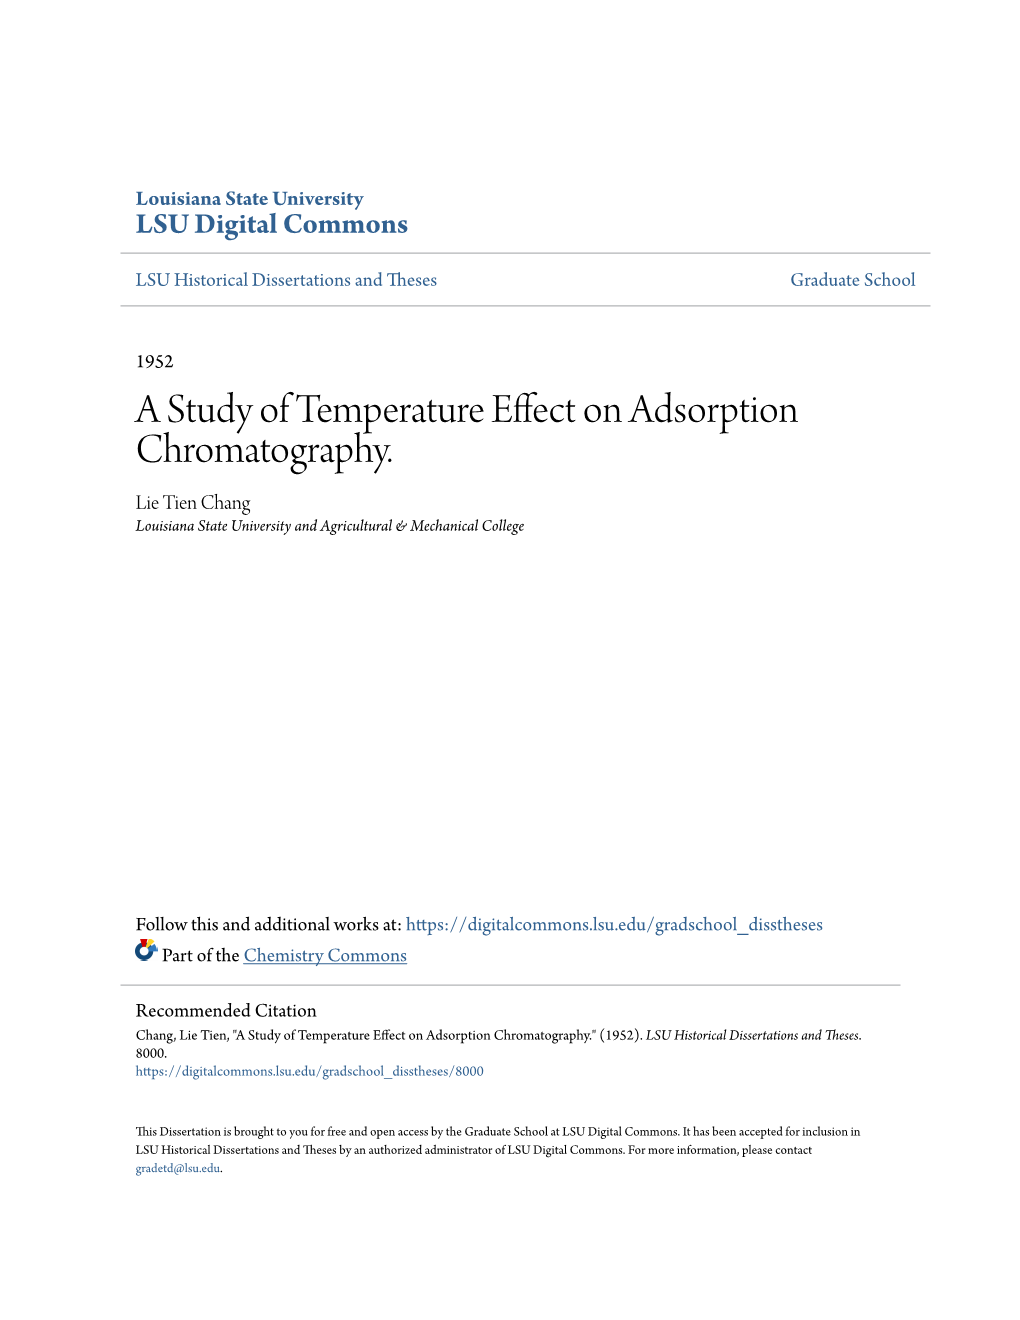 A Study of Temperature Effect on Adsorption Chromatography. Lie Tien Chang Louisiana State University and Agricultural & Mechanical College